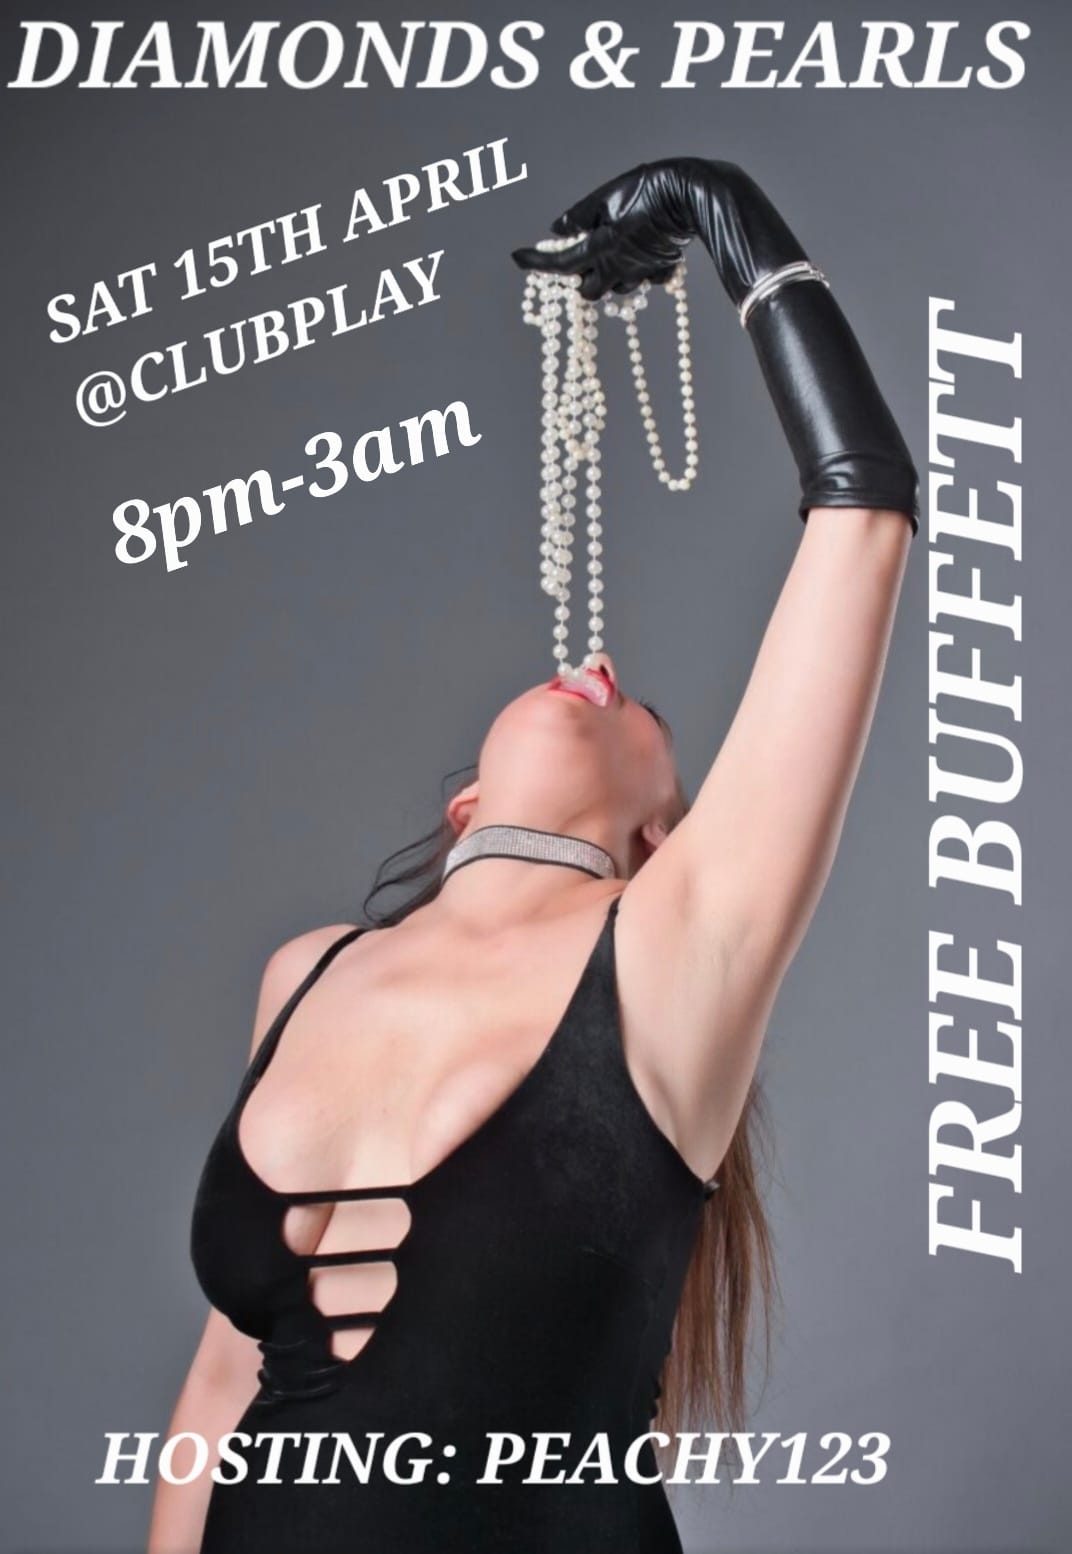 Diamonds and Pearls - Sat 15th April - 8pm till 3am CLUB PLAY - FREE ENTRY FOR SINGLE LADIES